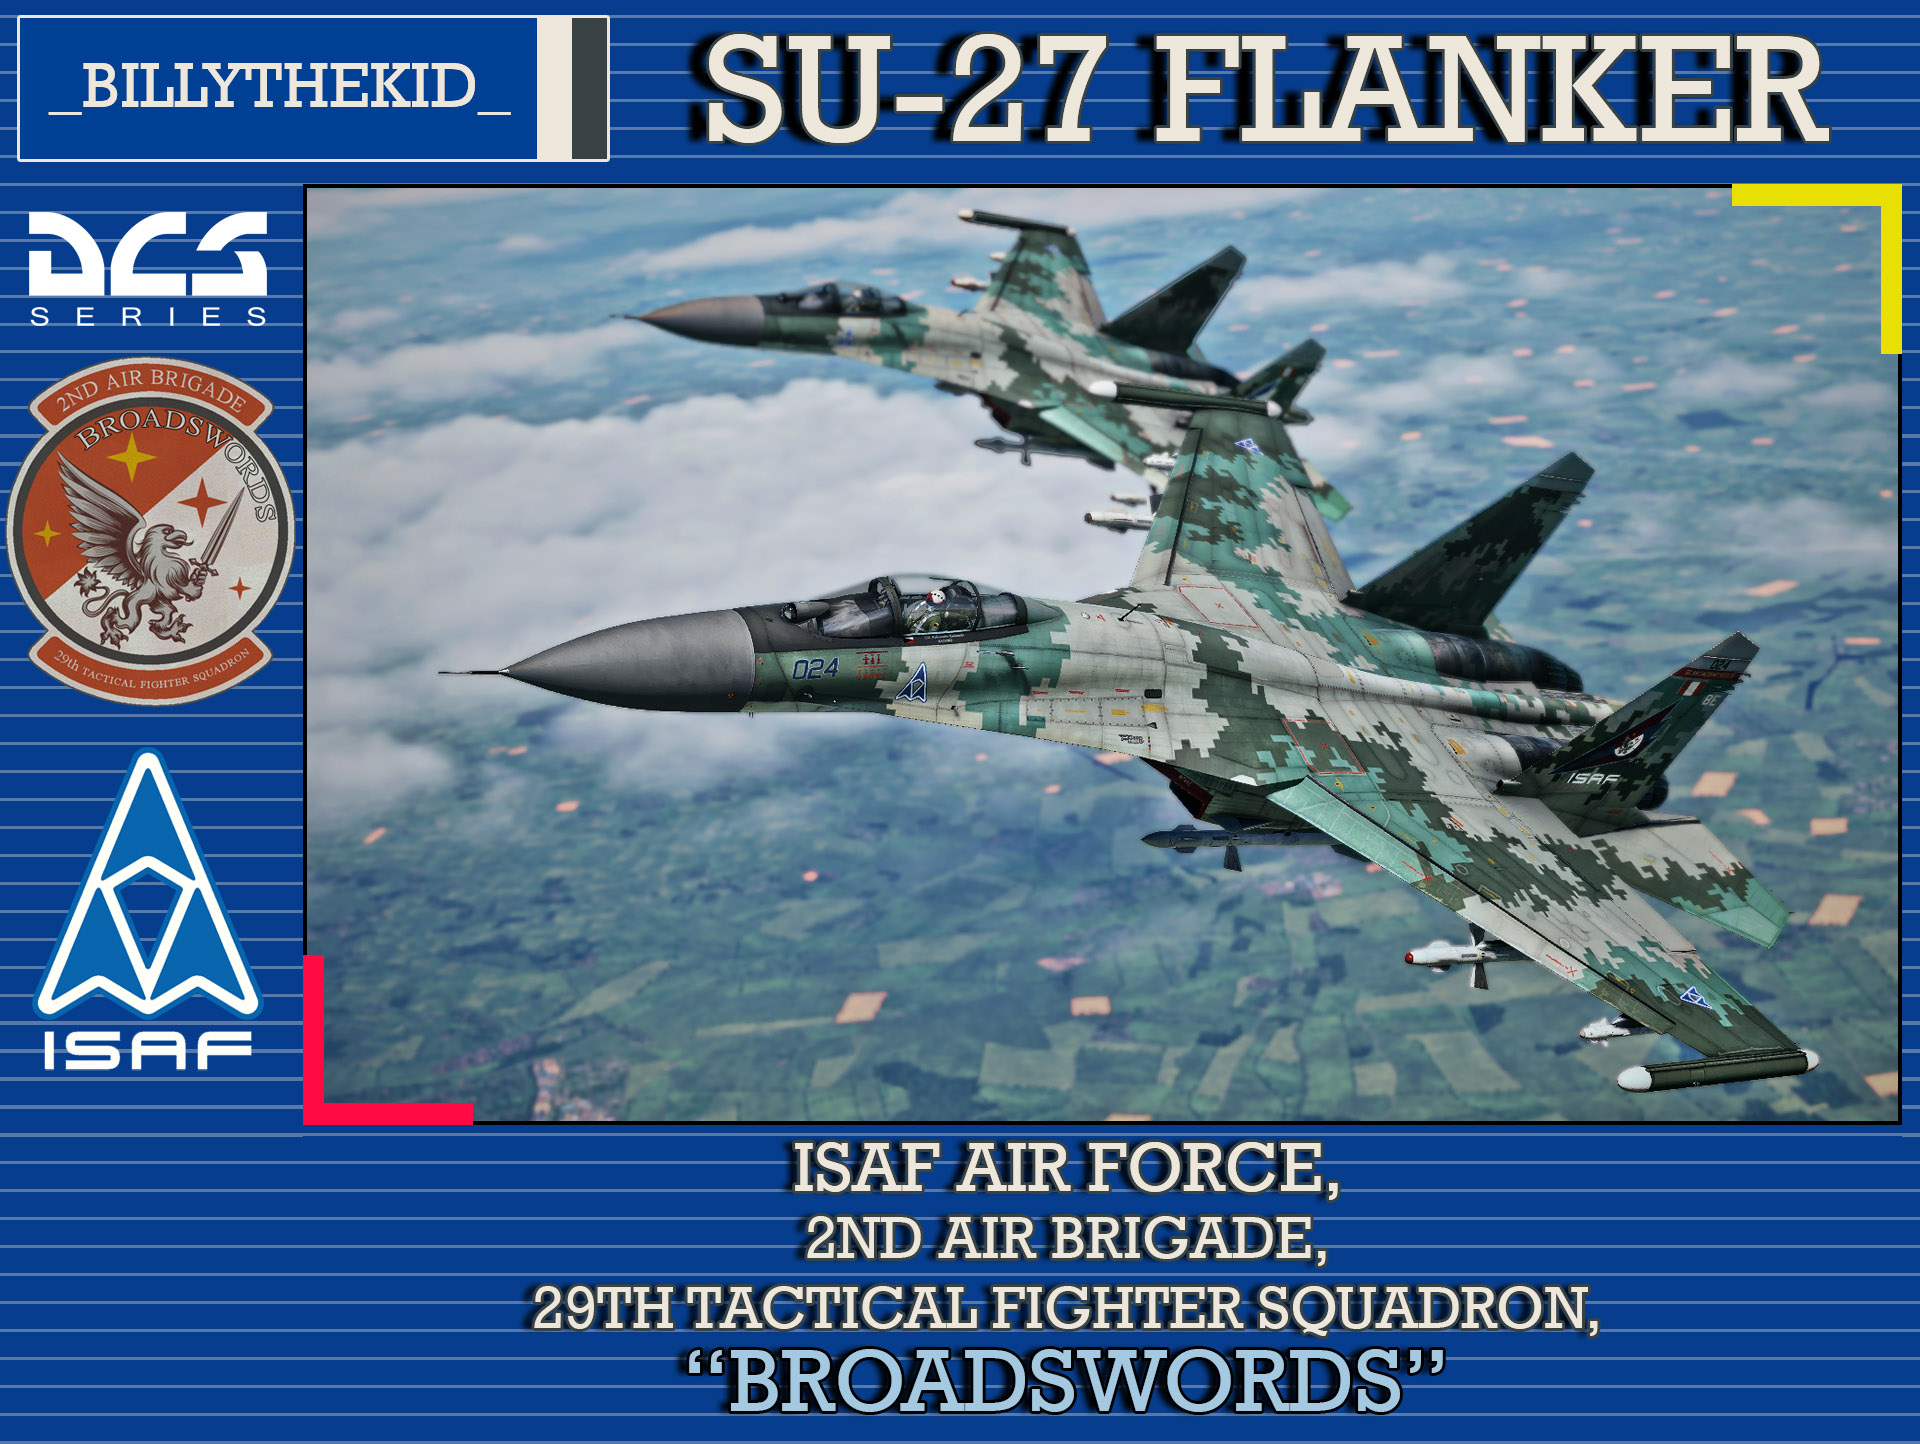 Ace Combat - ISAF Air Force - 2nd Air Brigade - 29th Tactical Fighter Squadron "Broadswords" SU-27 Flanker